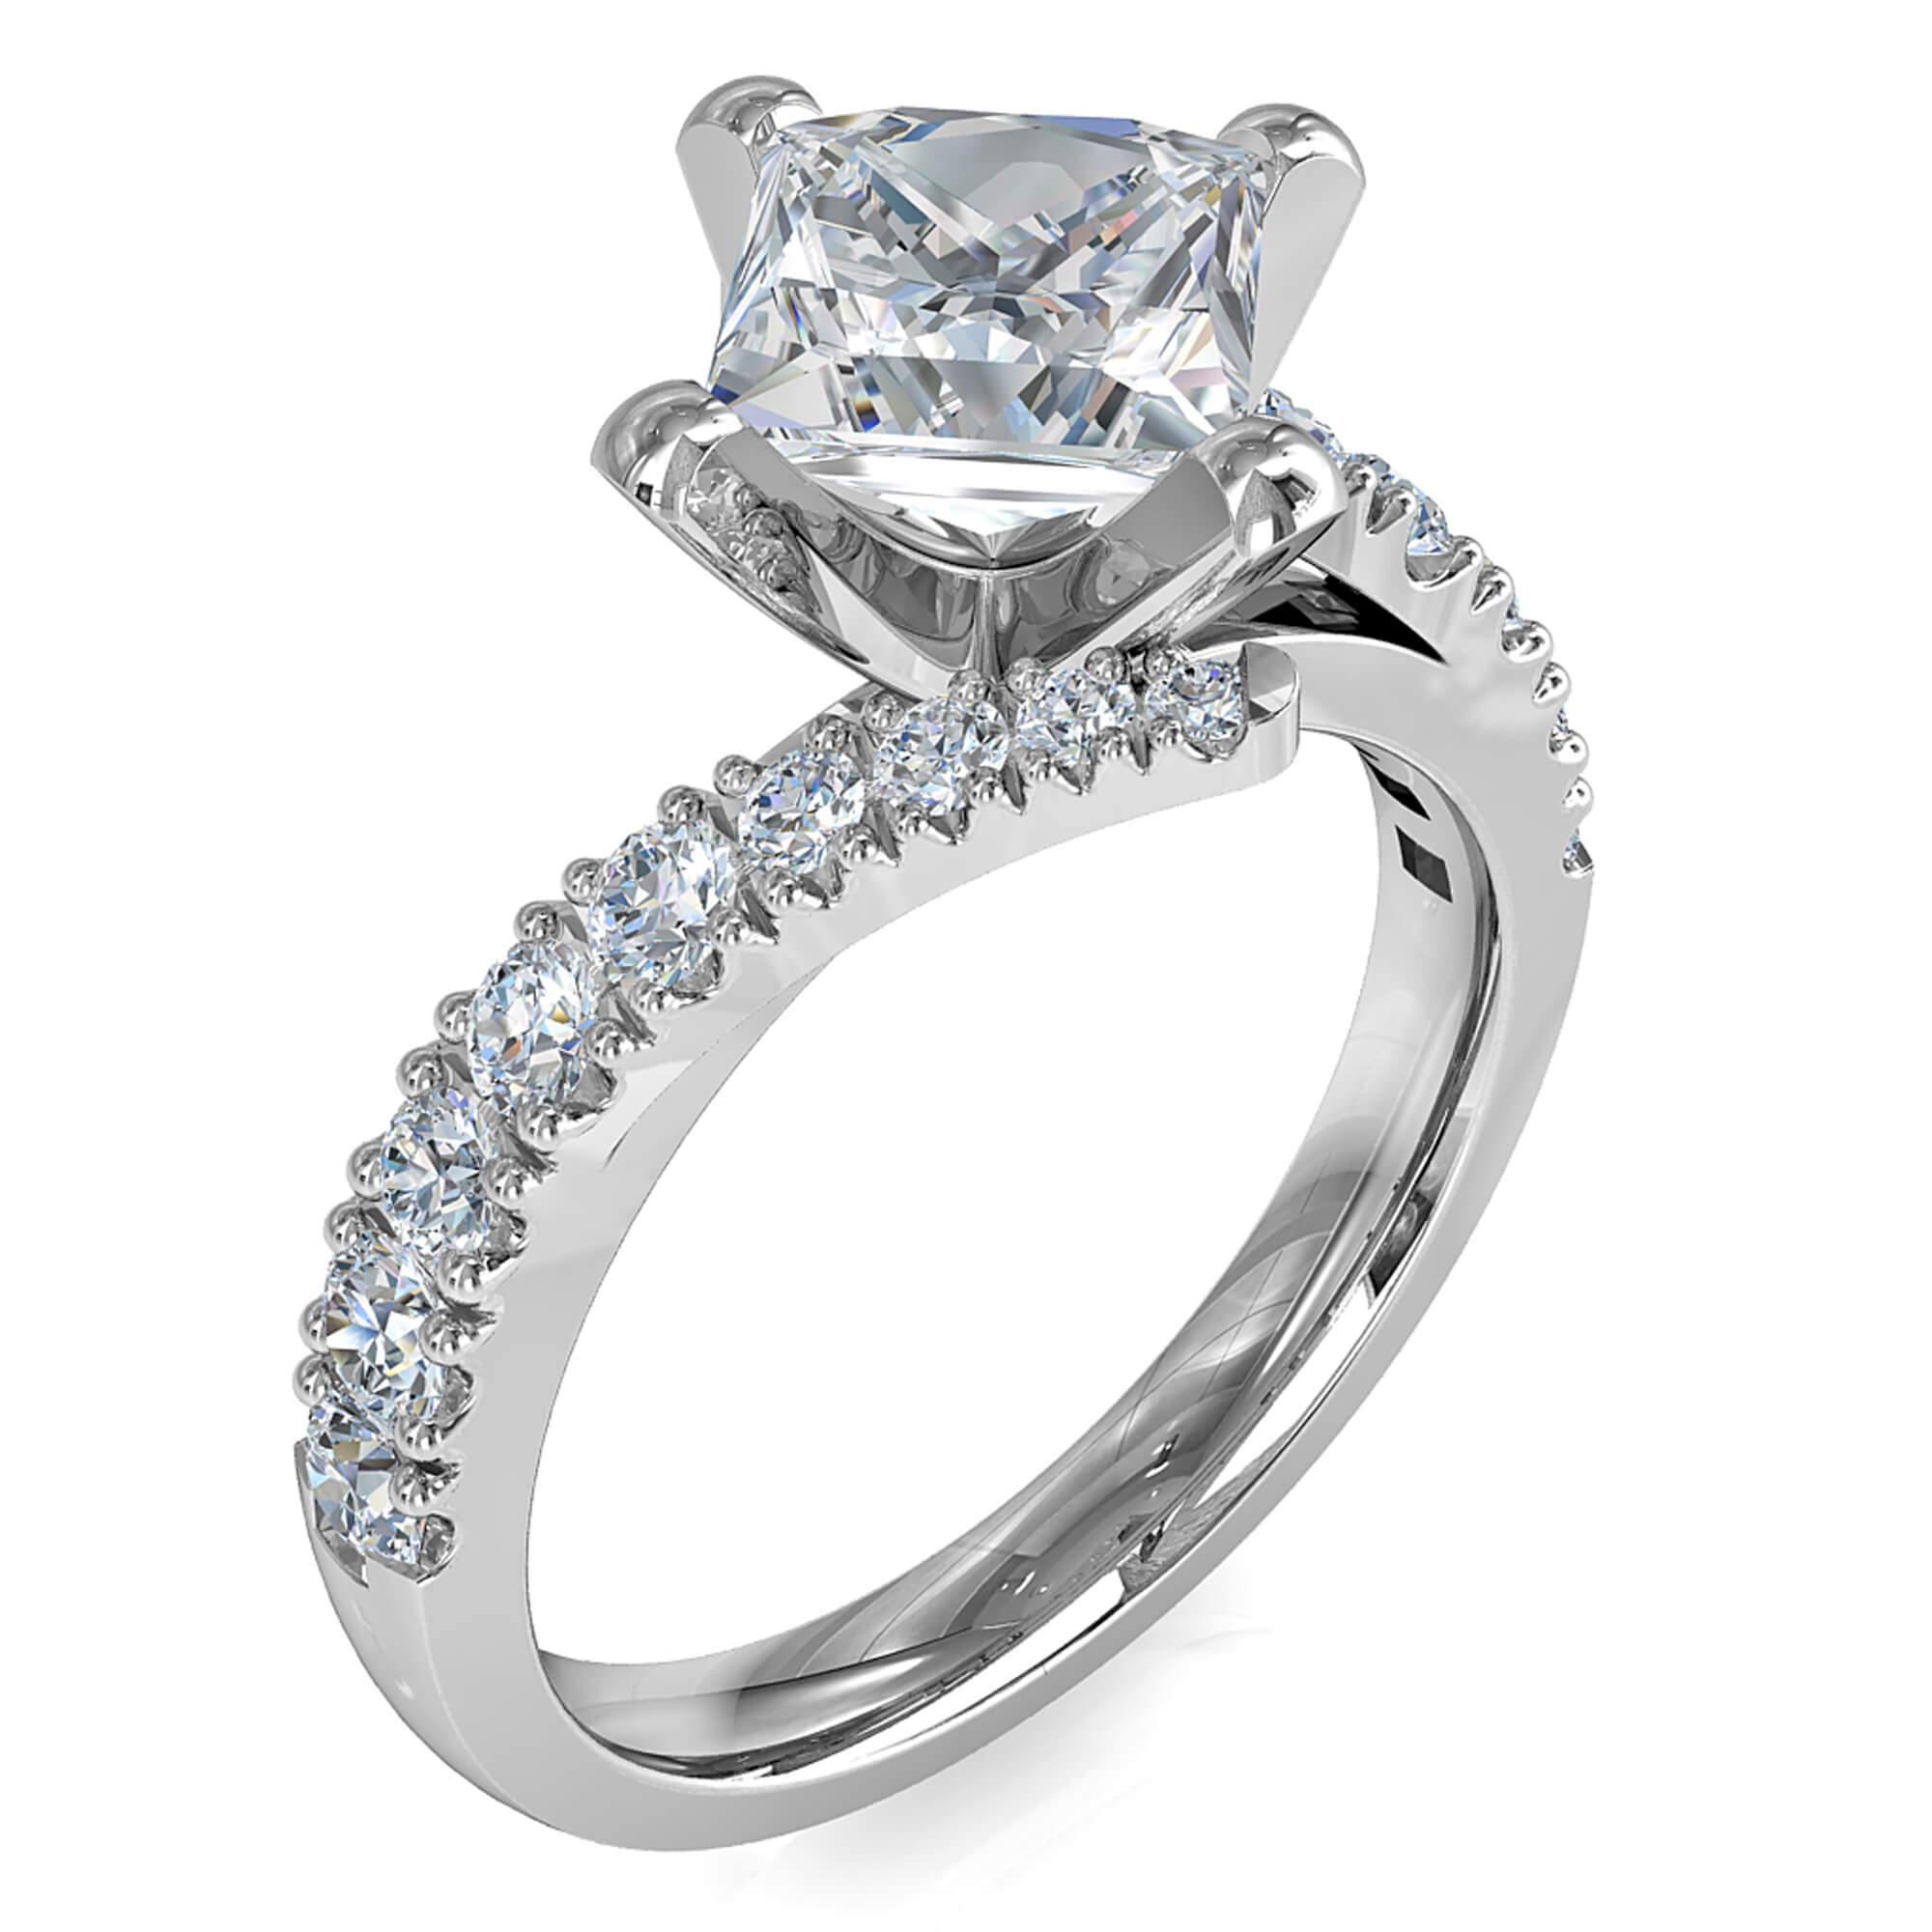 Princess Cut Solitaire Diamond Engagement Ring, 4 Square Offset Claws on a with Sweeping Cut Claw Band.